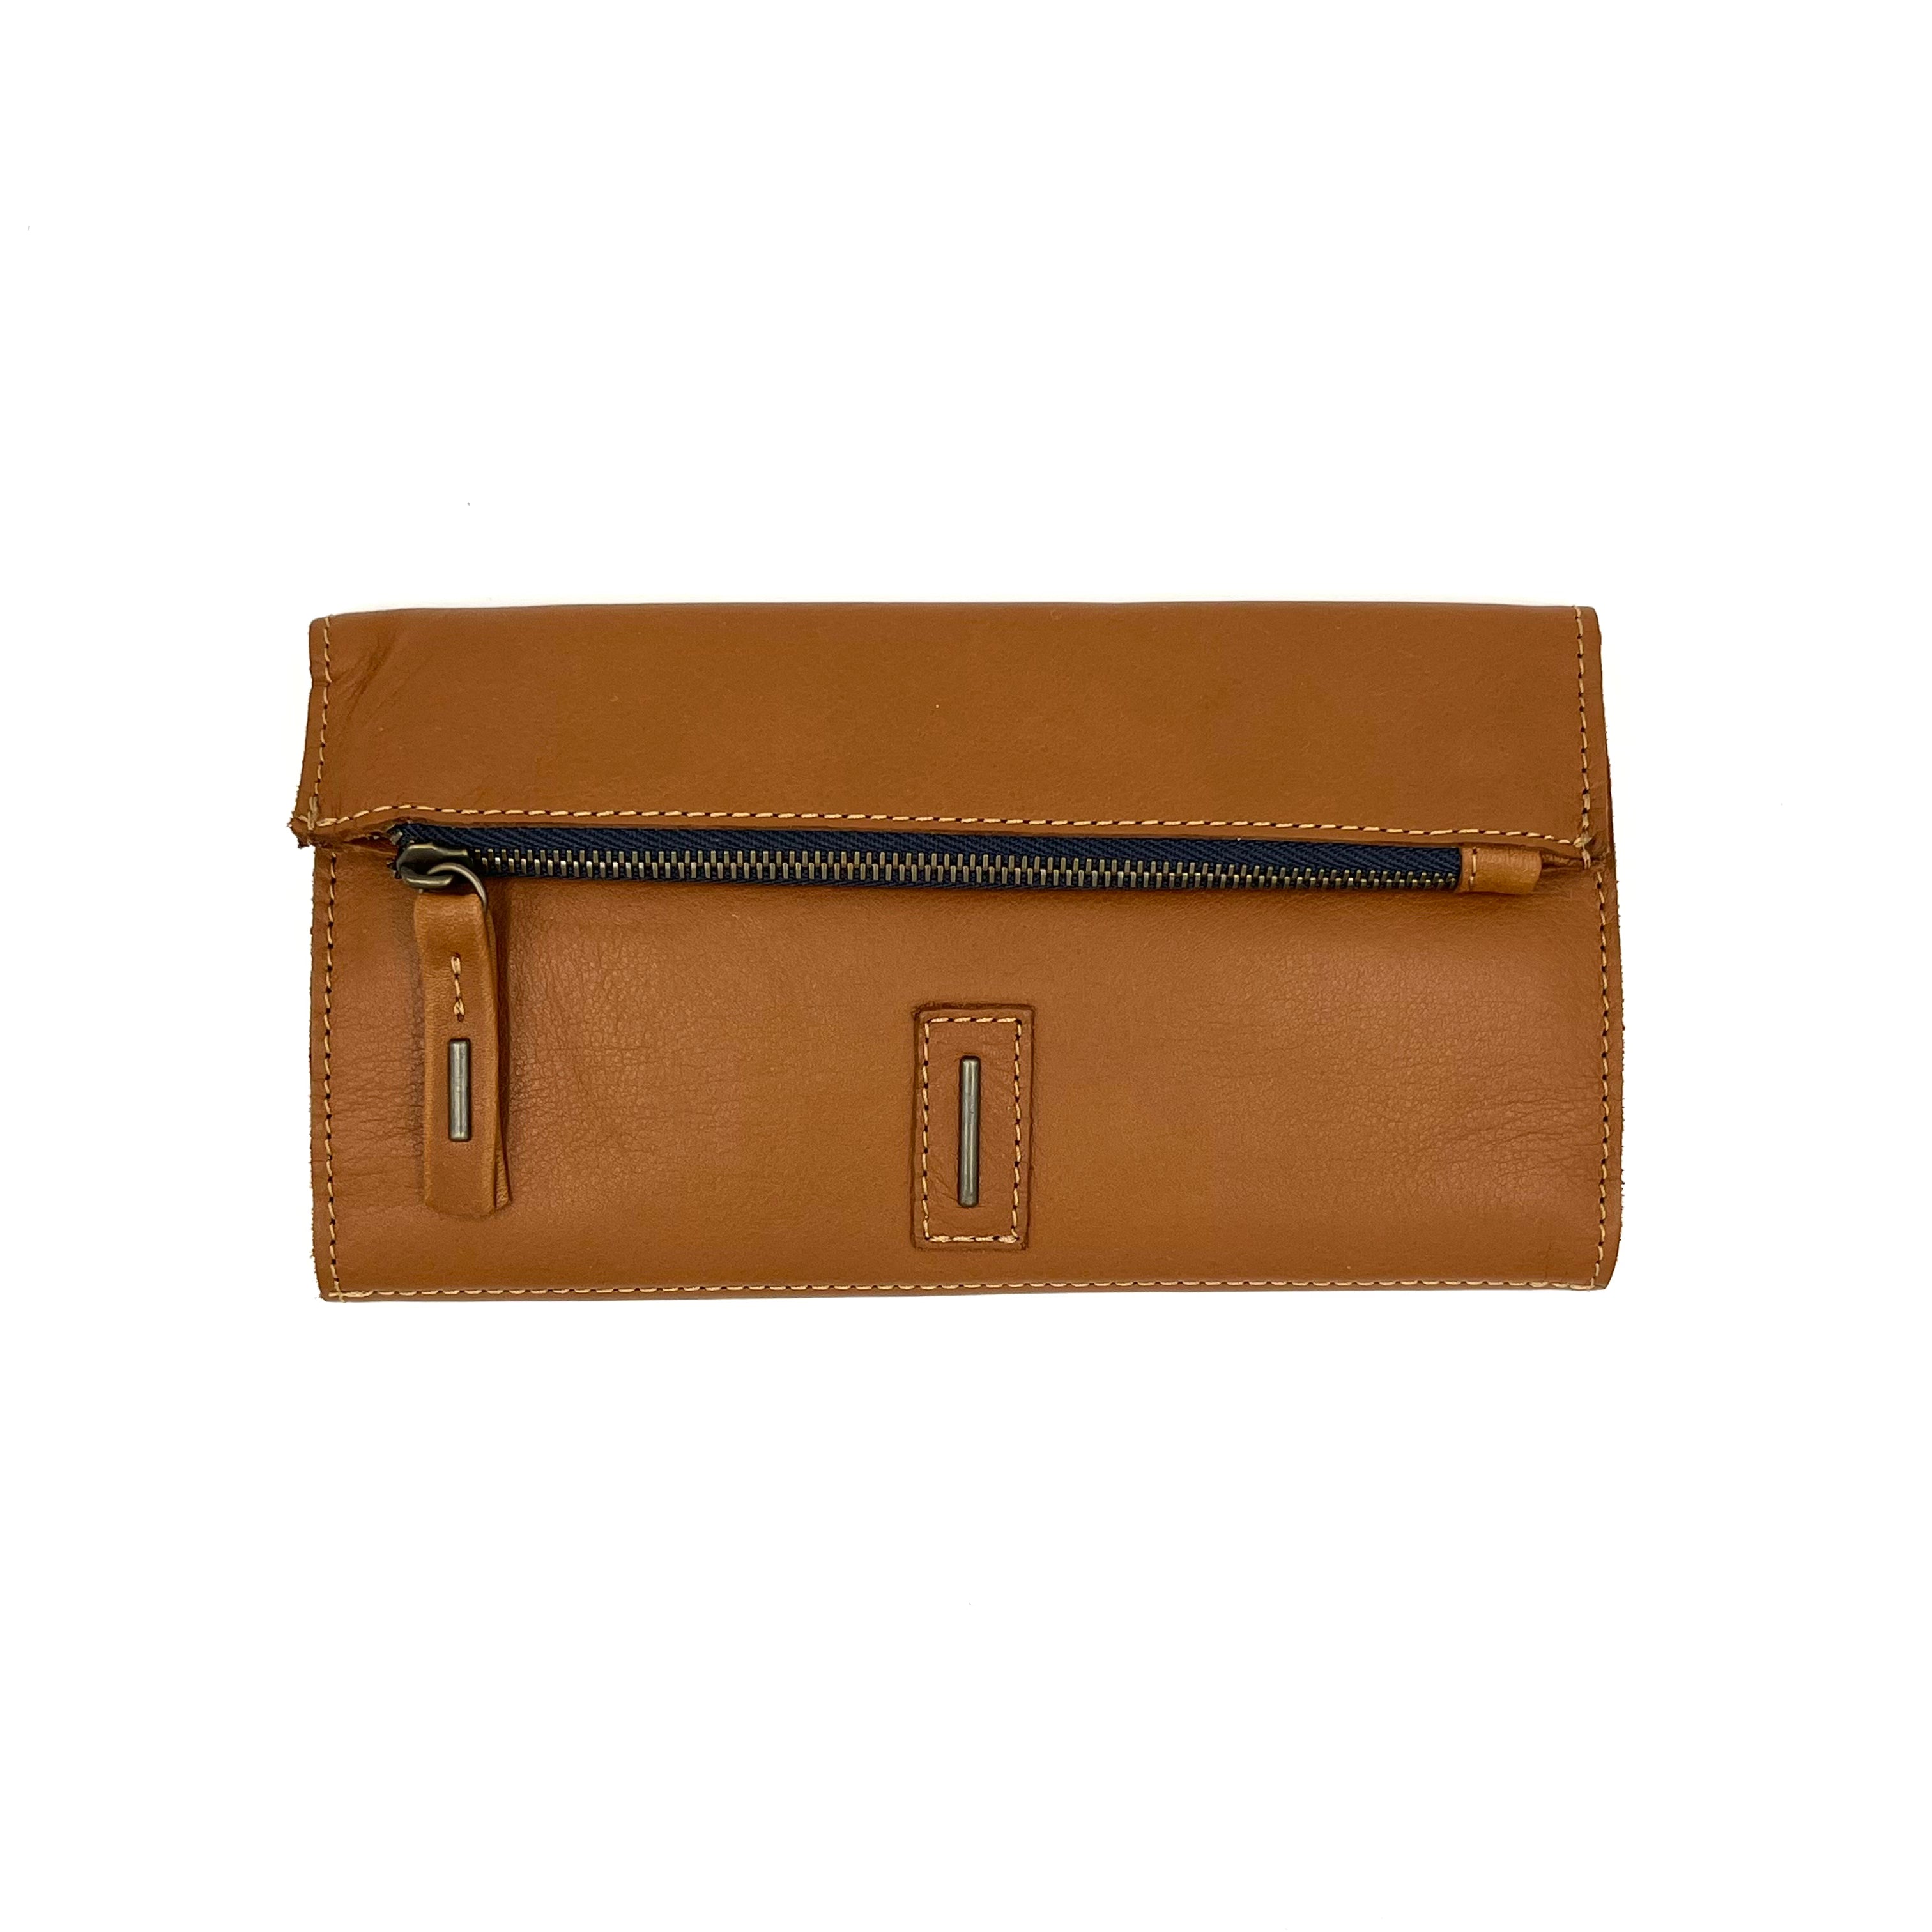 Max wallet mousse leather 